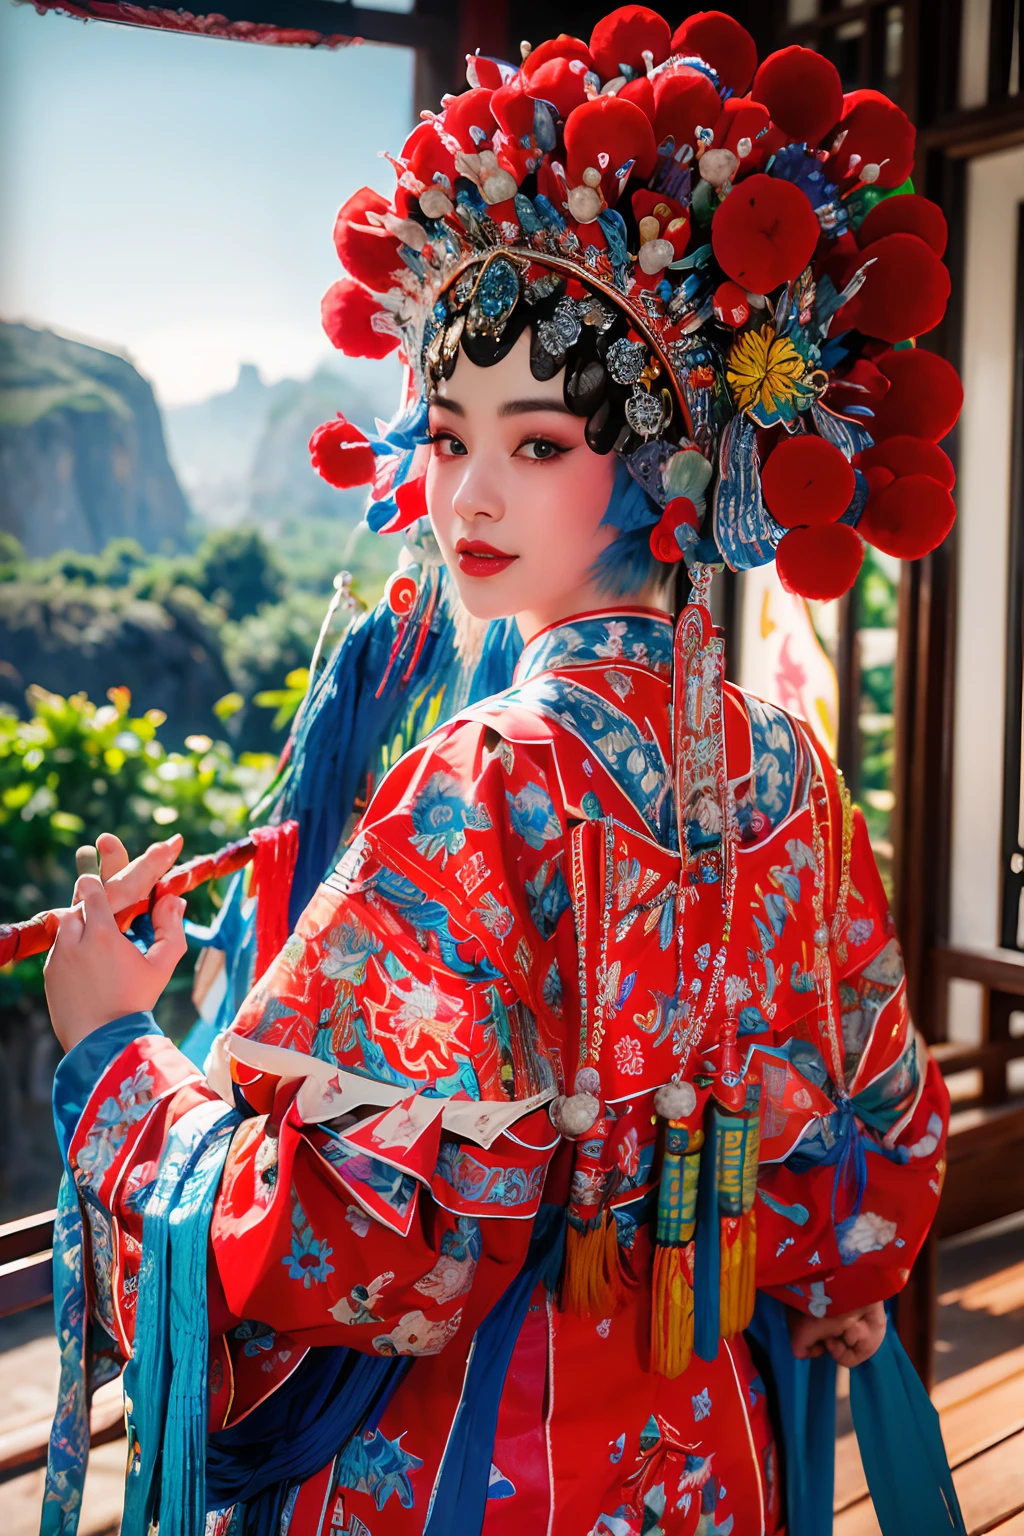 8K，RAW photos，best qualtiy，tmasterpiece，realisticlying，photograph realistic，ultra - detailed， 1 girl，CNOperaCrown，solo，sportrait， Peking Opera costumes，looking at viewert， ssmile， Keep one's mouth shut， From the front， putting makeup on， head gear， （（（CNOperaFlag）））， The flag is from behind，  The upper part of the body， nipple tassels，florals，（Daumadan：1.4），（simple backgound：1.5），